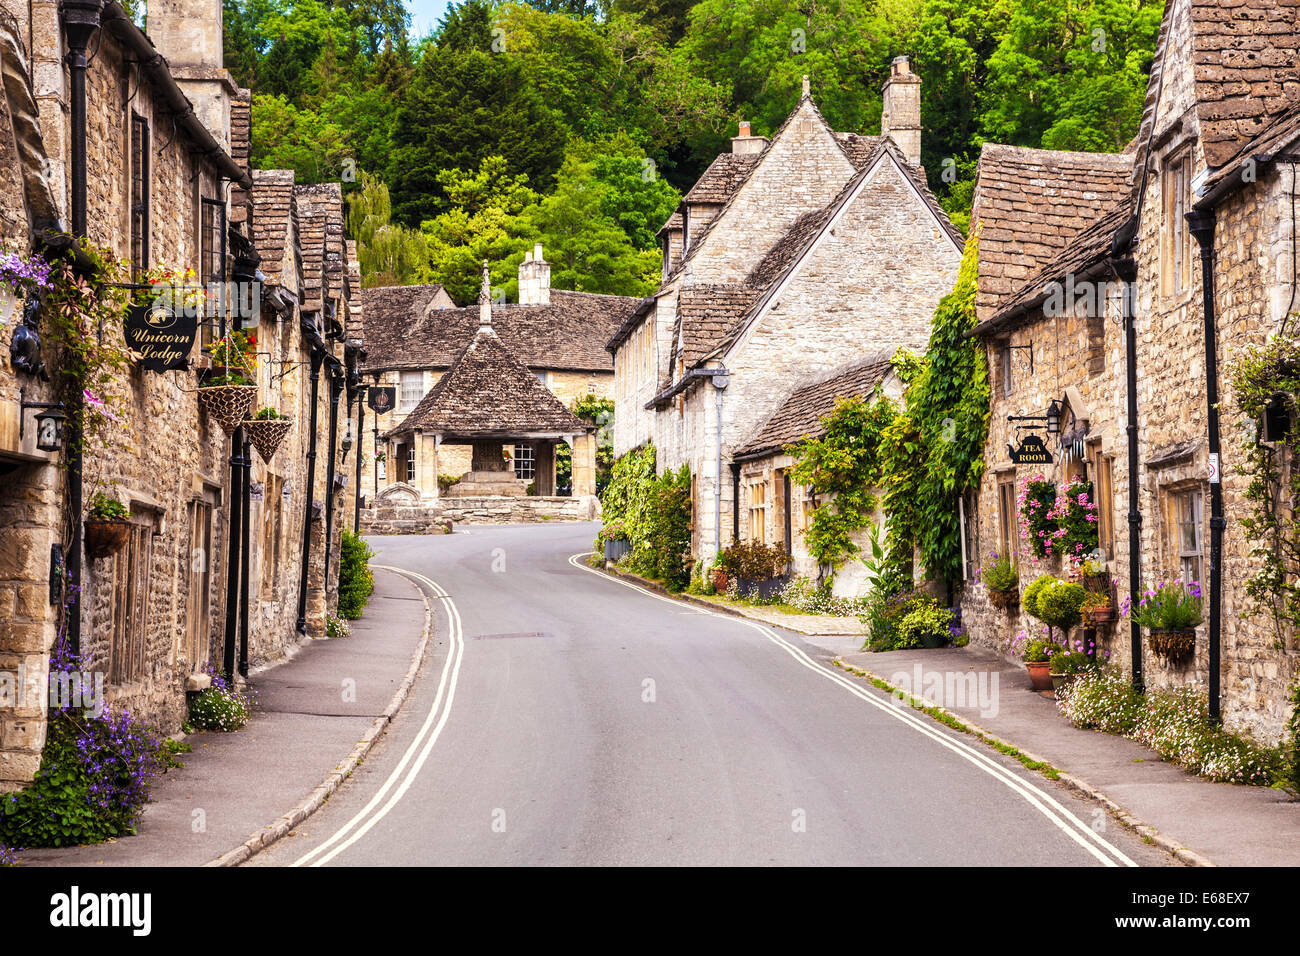 The picturesque Cotswold village of Castle Combe  in Wiltshire. Stock Photo